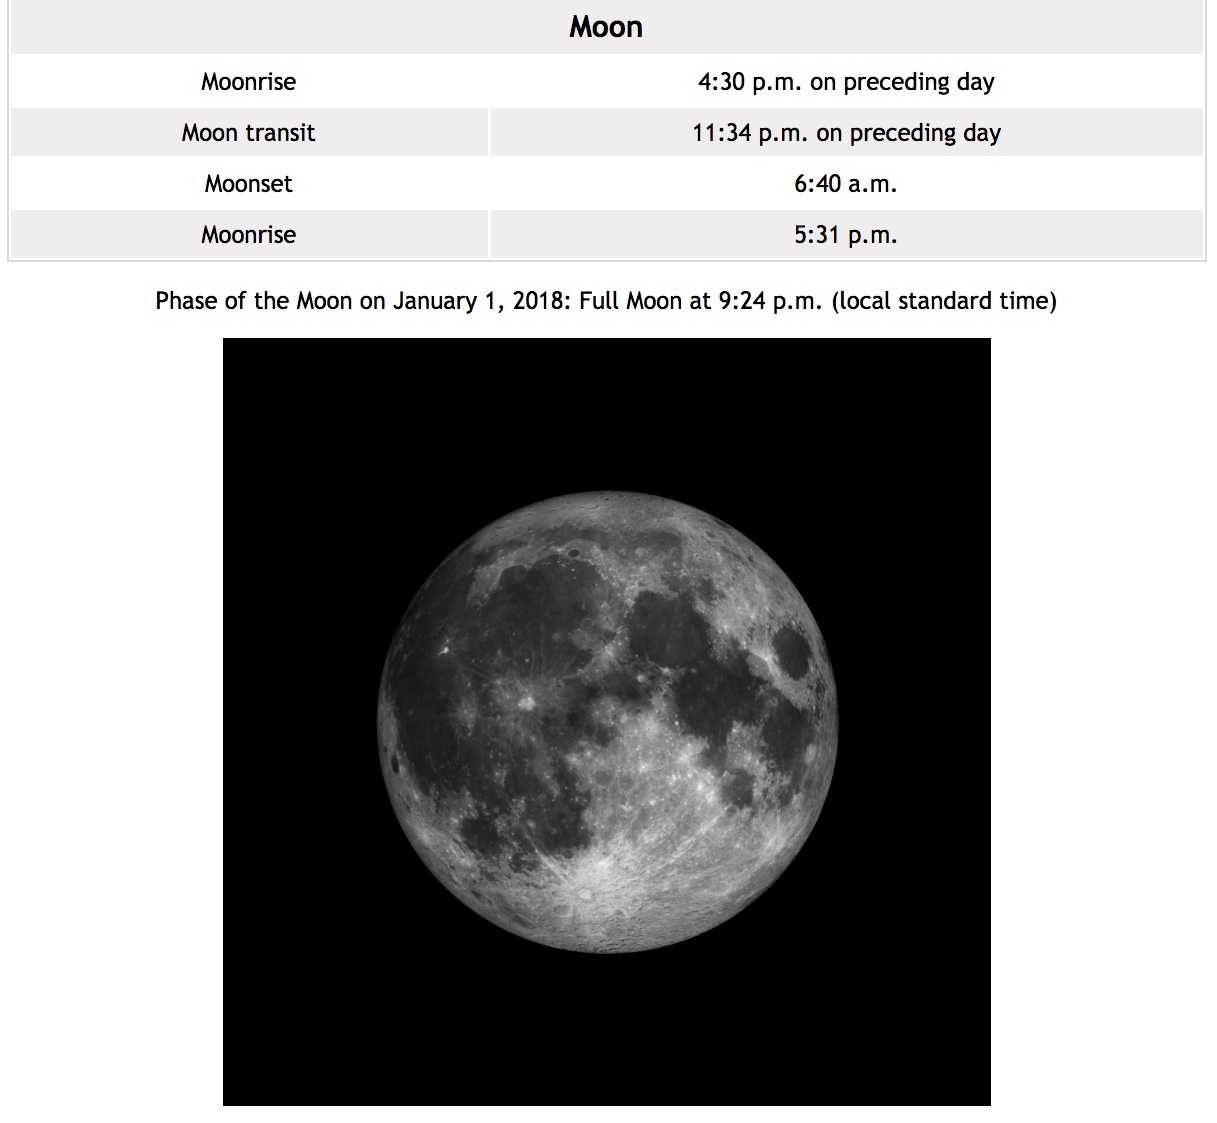 A screen shot of data and an image of the moon from the website is shown.